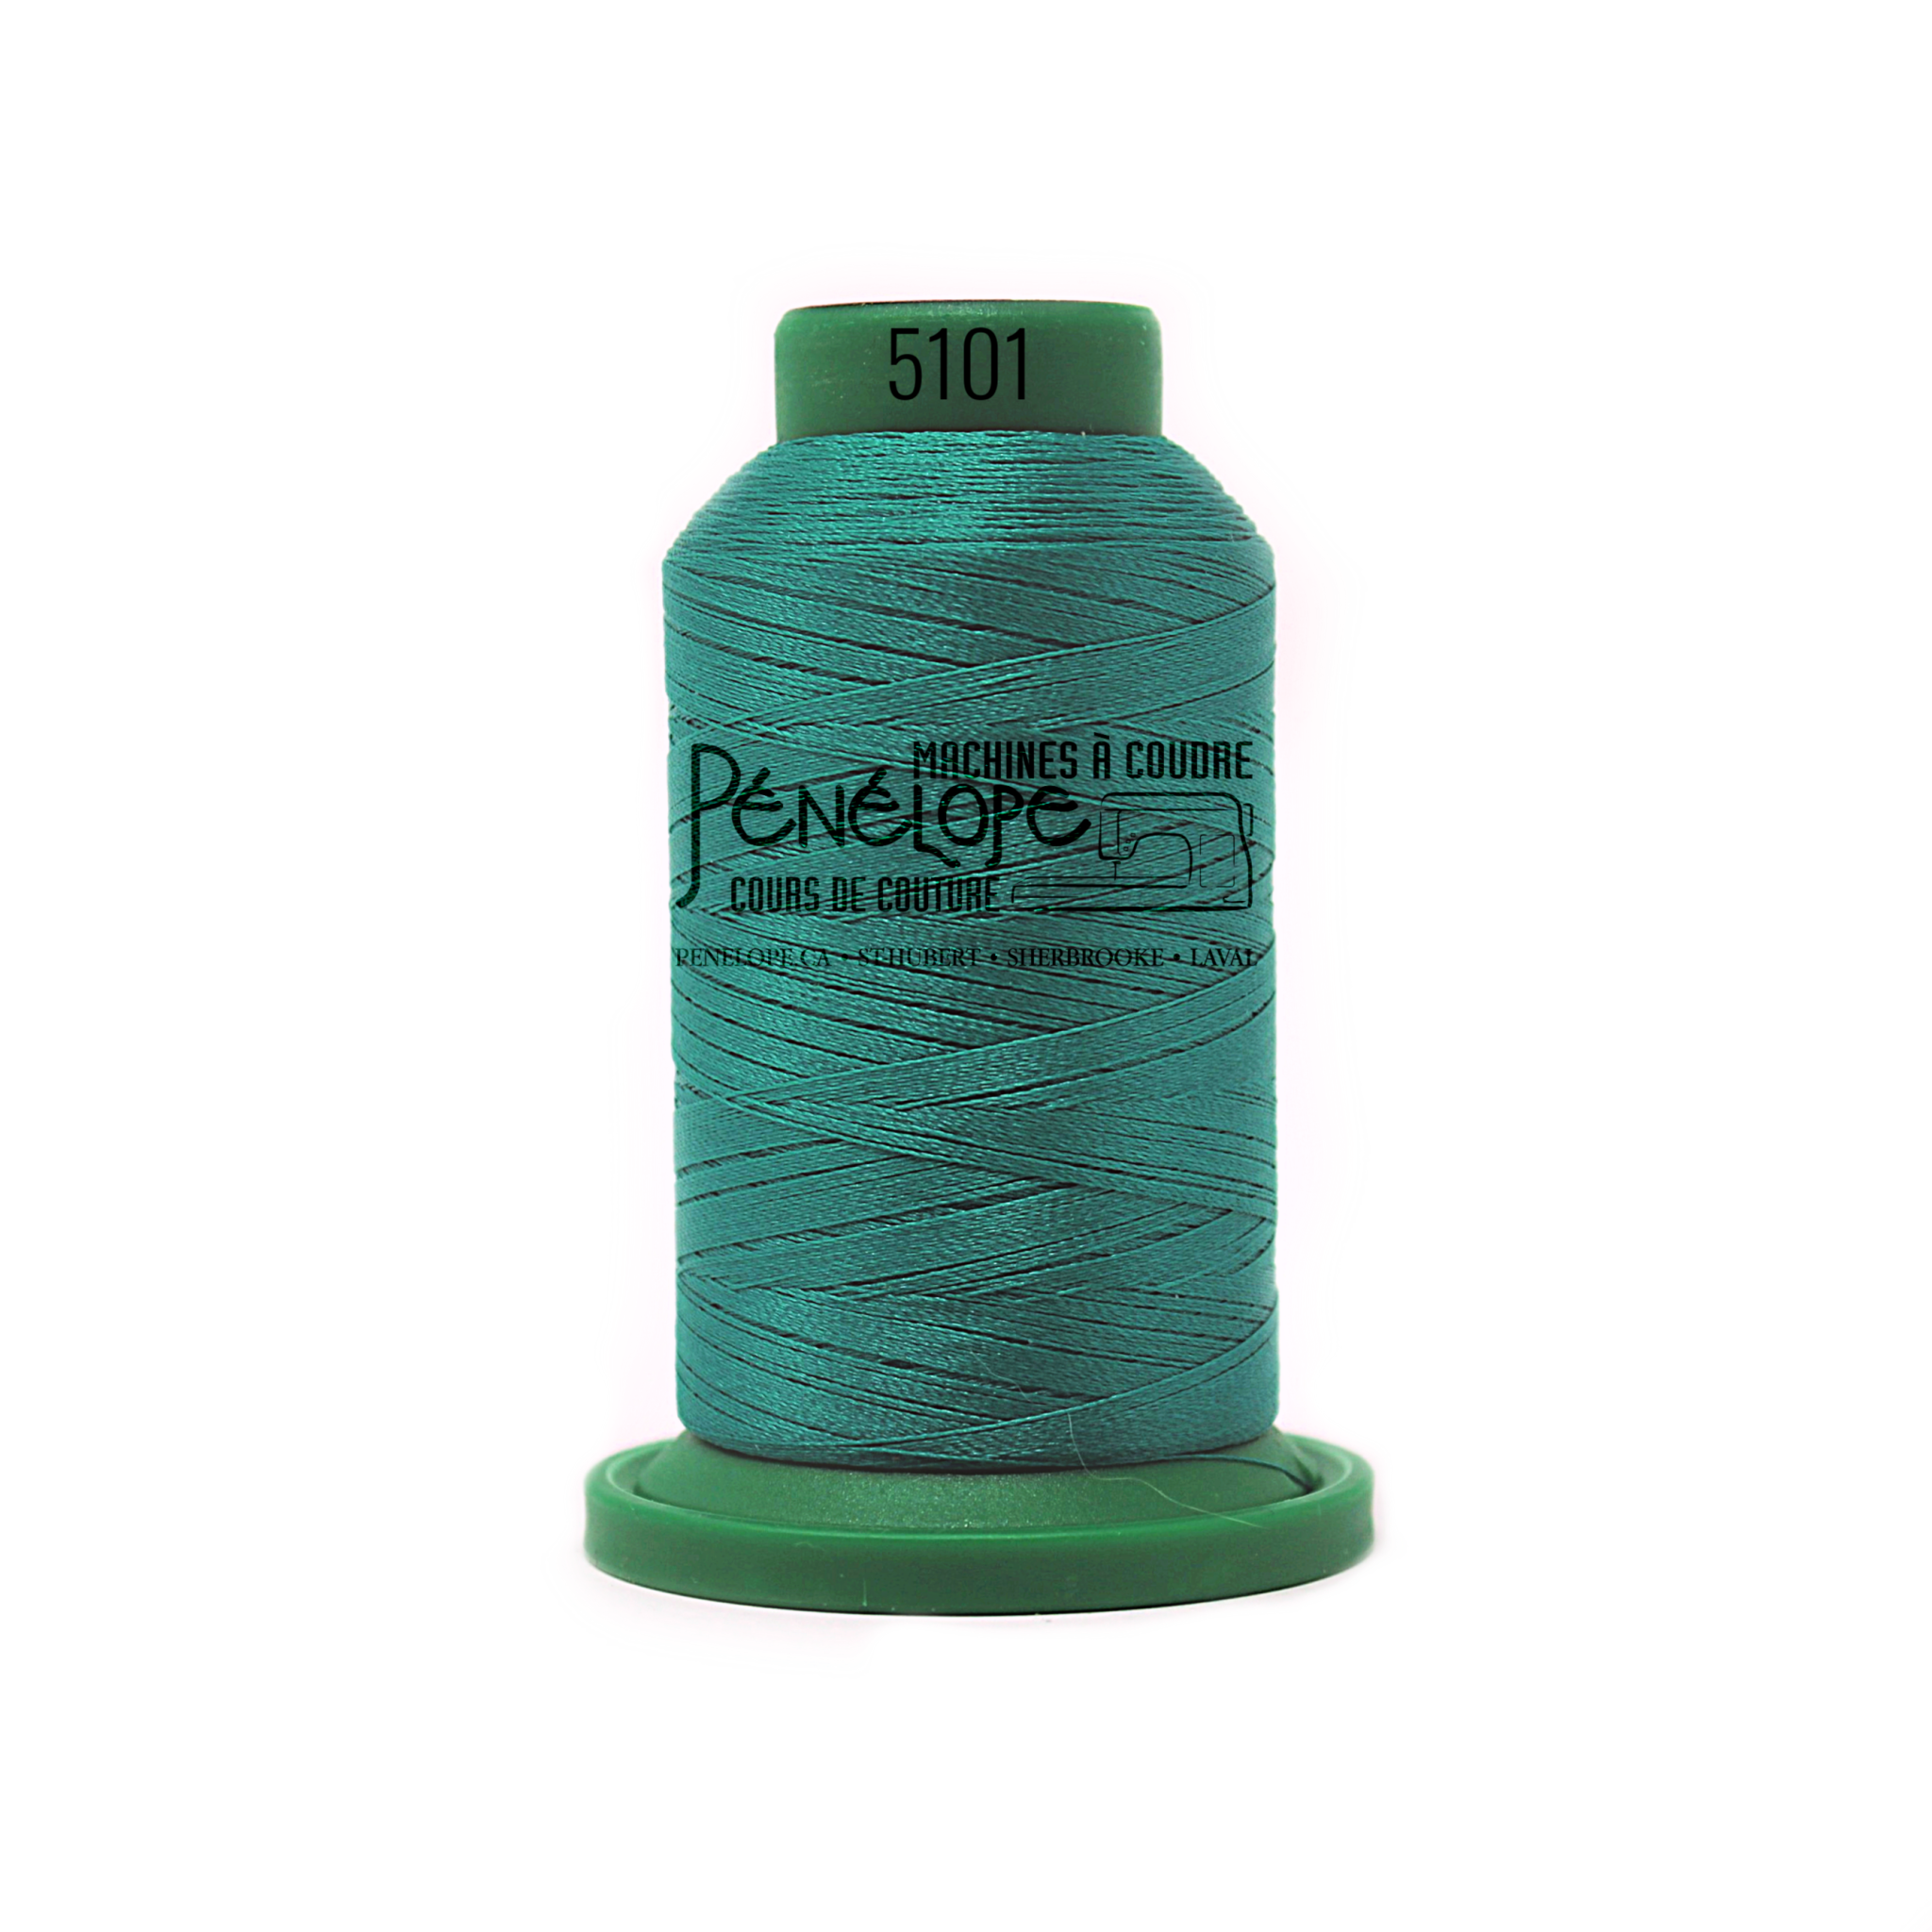 Isacord Isacord thread 5101 for embroidery and sewing